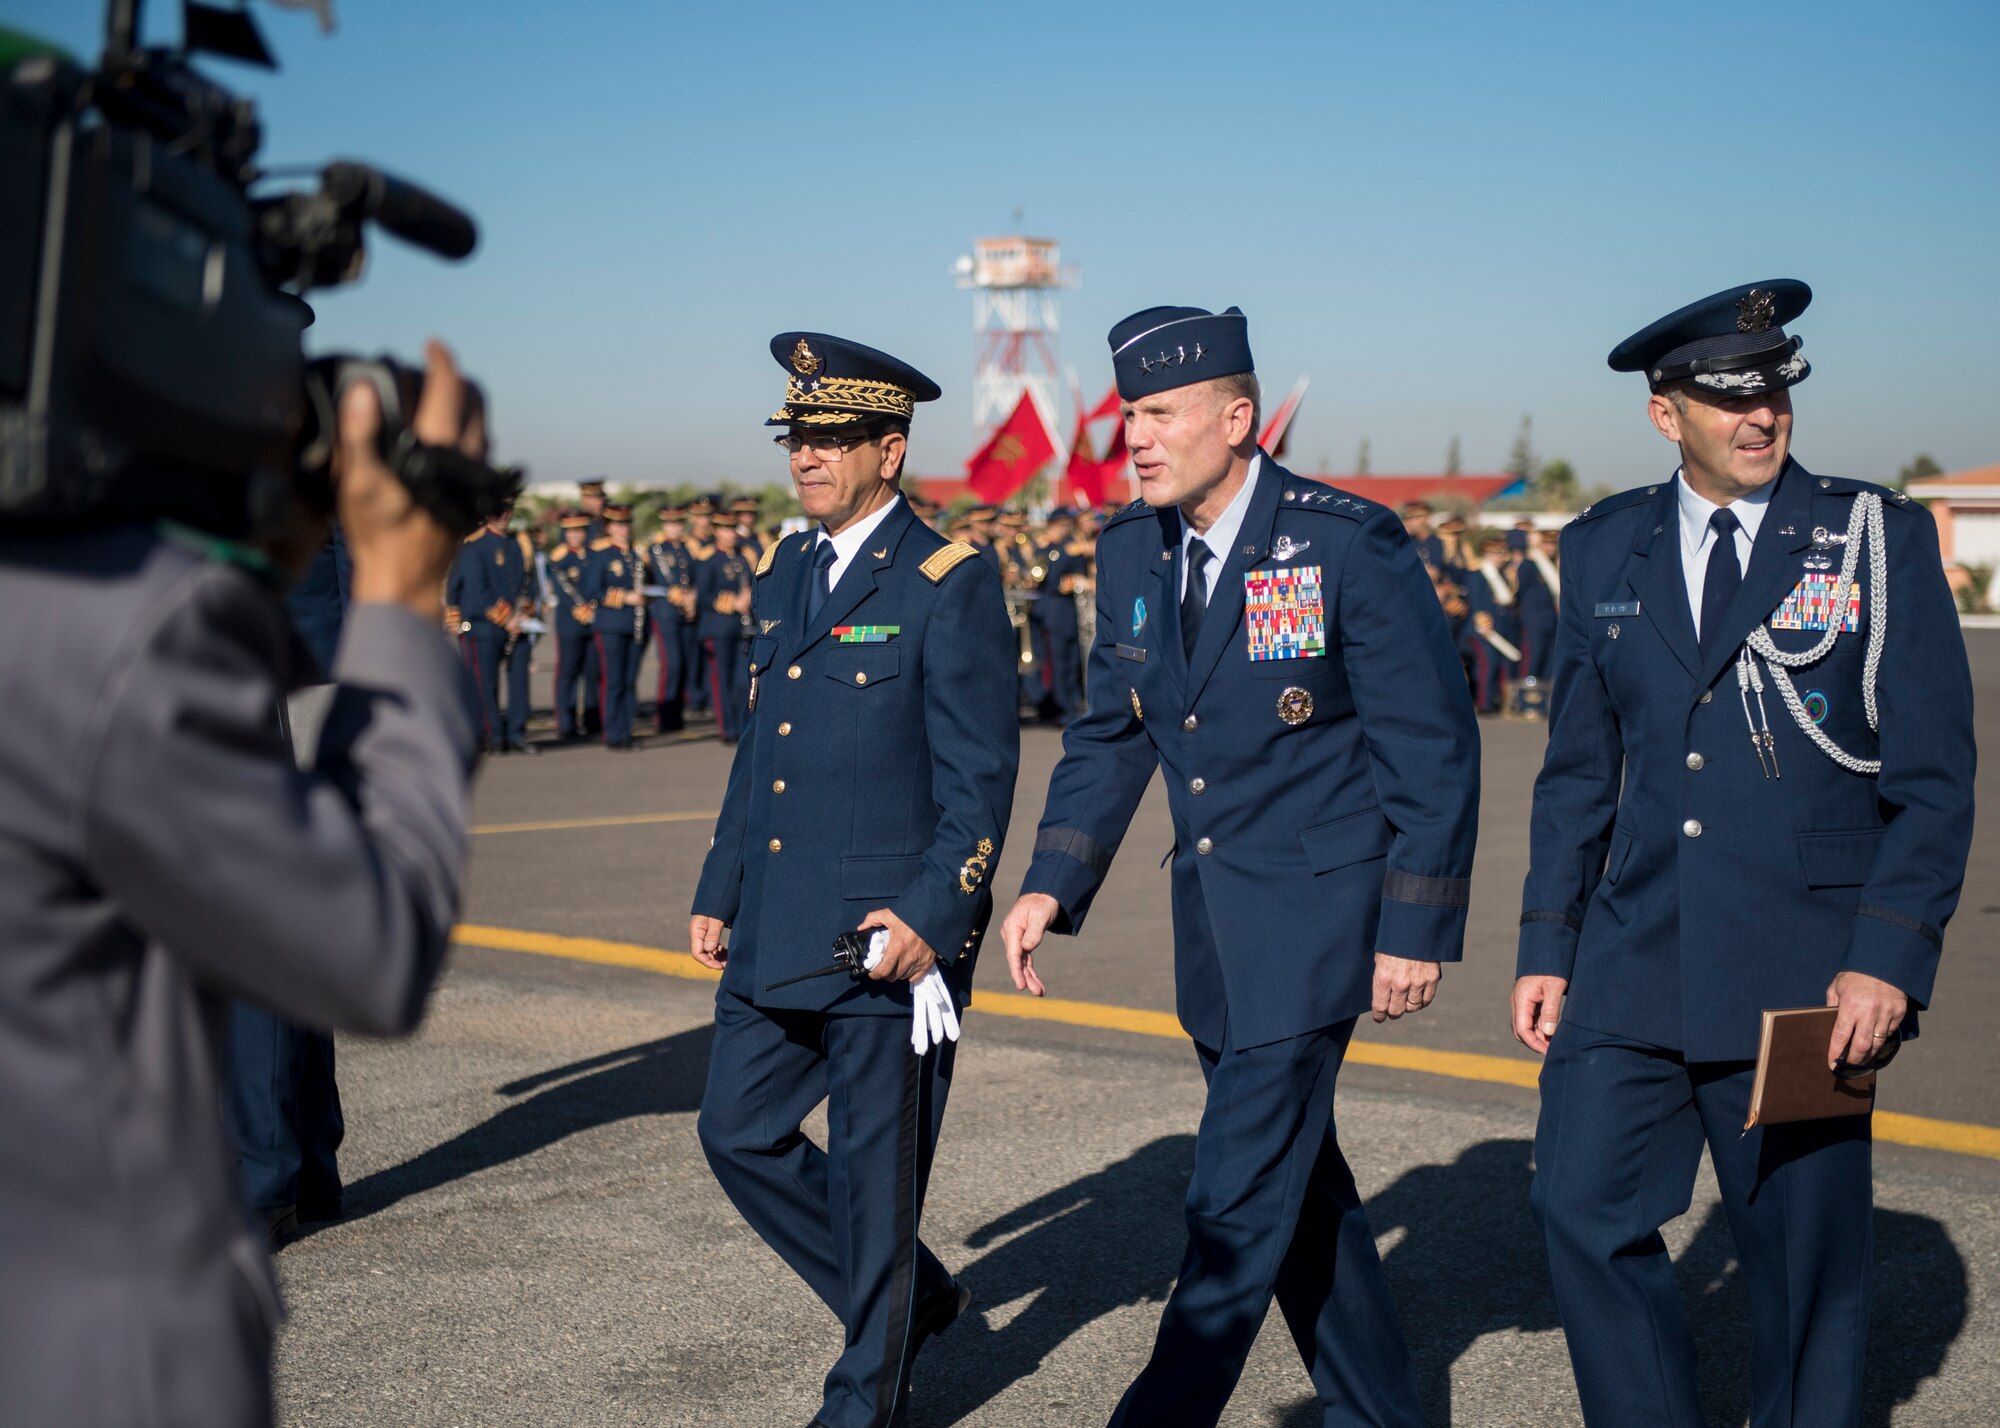 MARRAKECH, Morocco (Oct 24, 2018) ) General Tod Wolters, center, USAFE-AFAFRICA Commander, enters the Marrakech Air Show at RMAF Military Base. Direct participation in the air show supports U.S. Government security policy and promotes strong U.S. ties with Morocco. (DoD photo by Mass Communication Specialist 2nd Class Cody Hendrix)